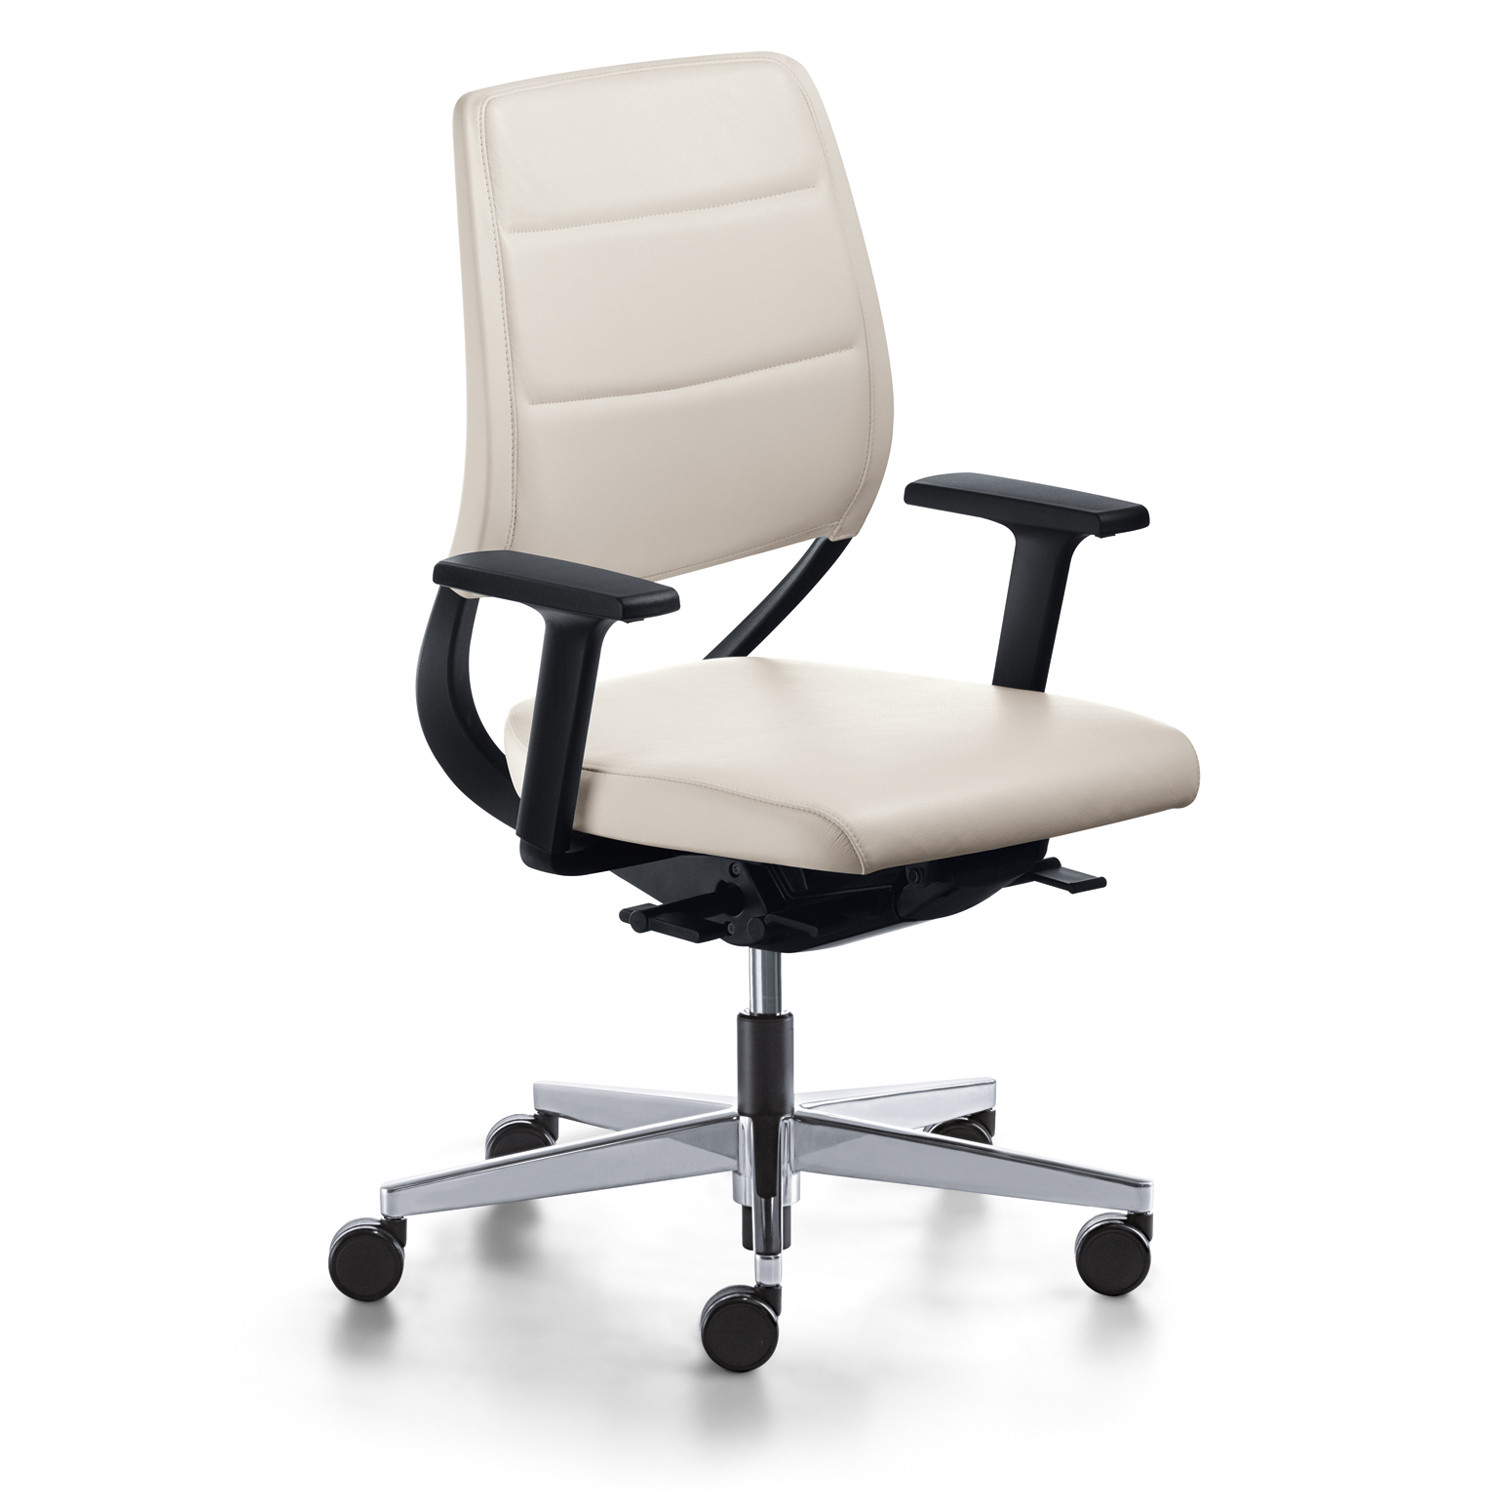 Match White Office Chair